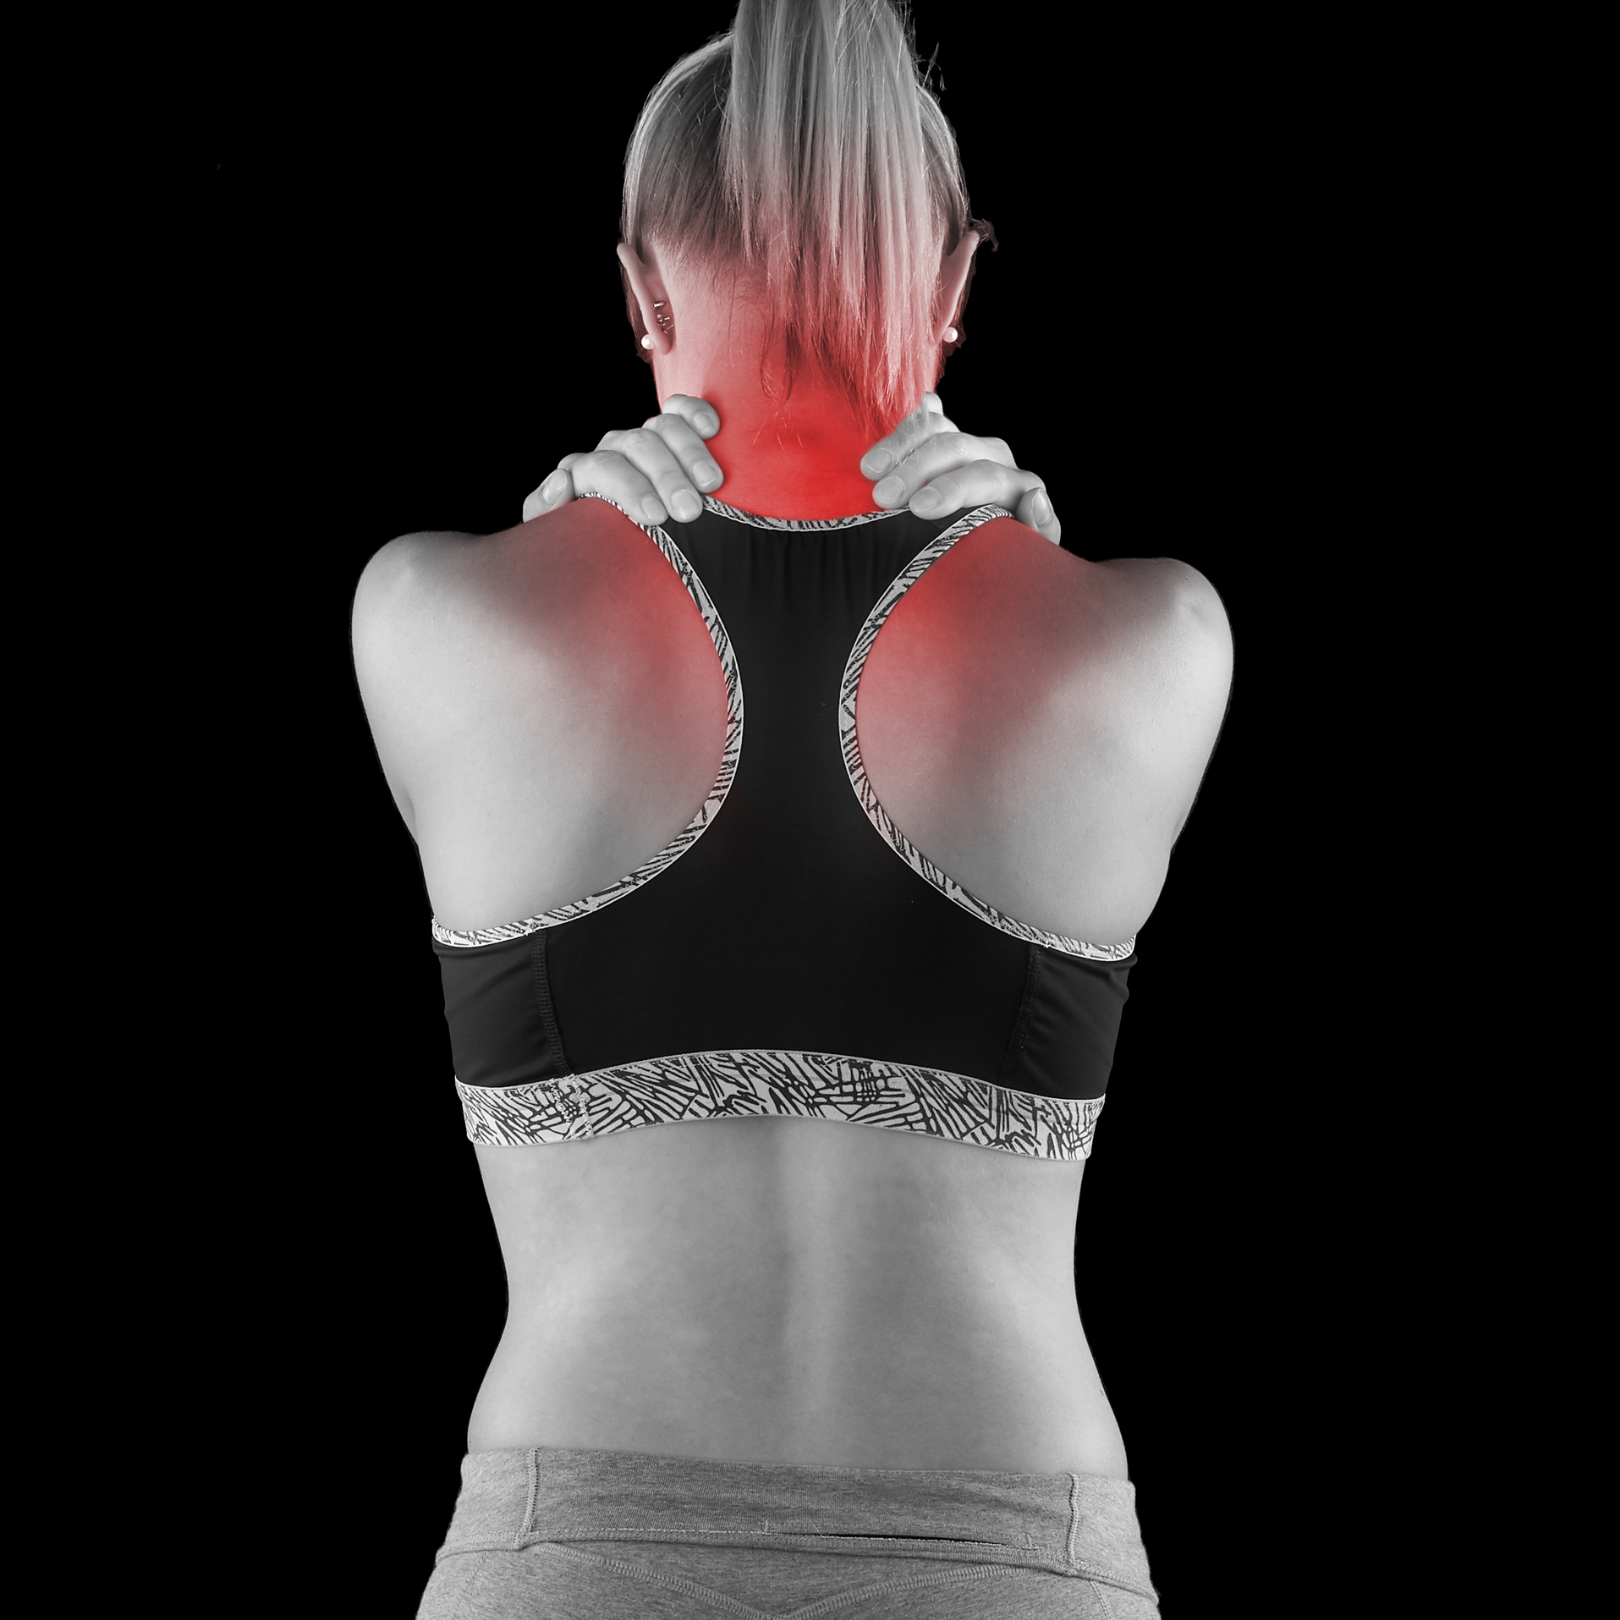 How to Fix Shoulder Pain From Bra Straps